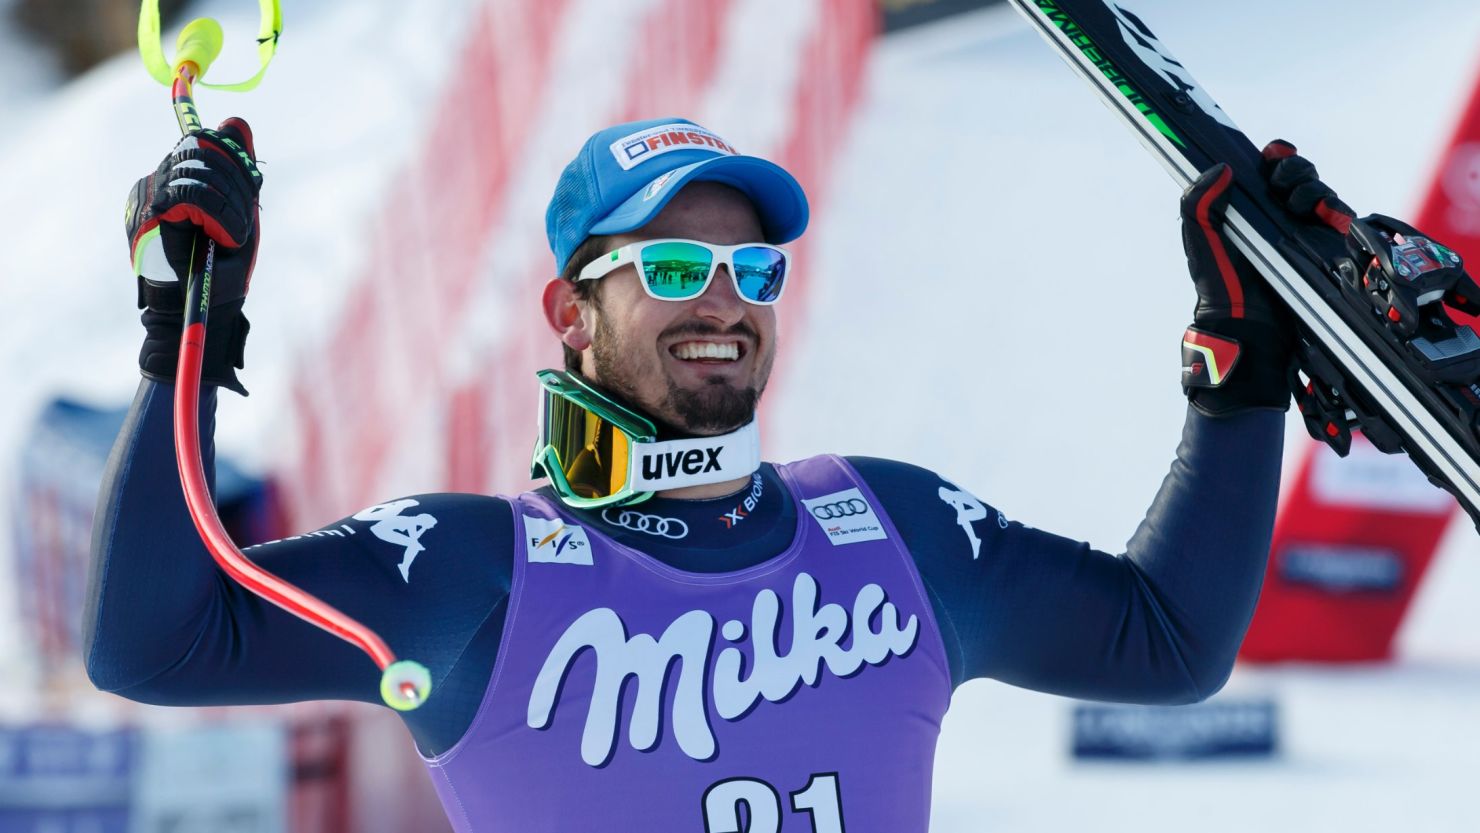 Paris clinched back-to-back World Cup titles with victory in Kvitfjell, Norway.